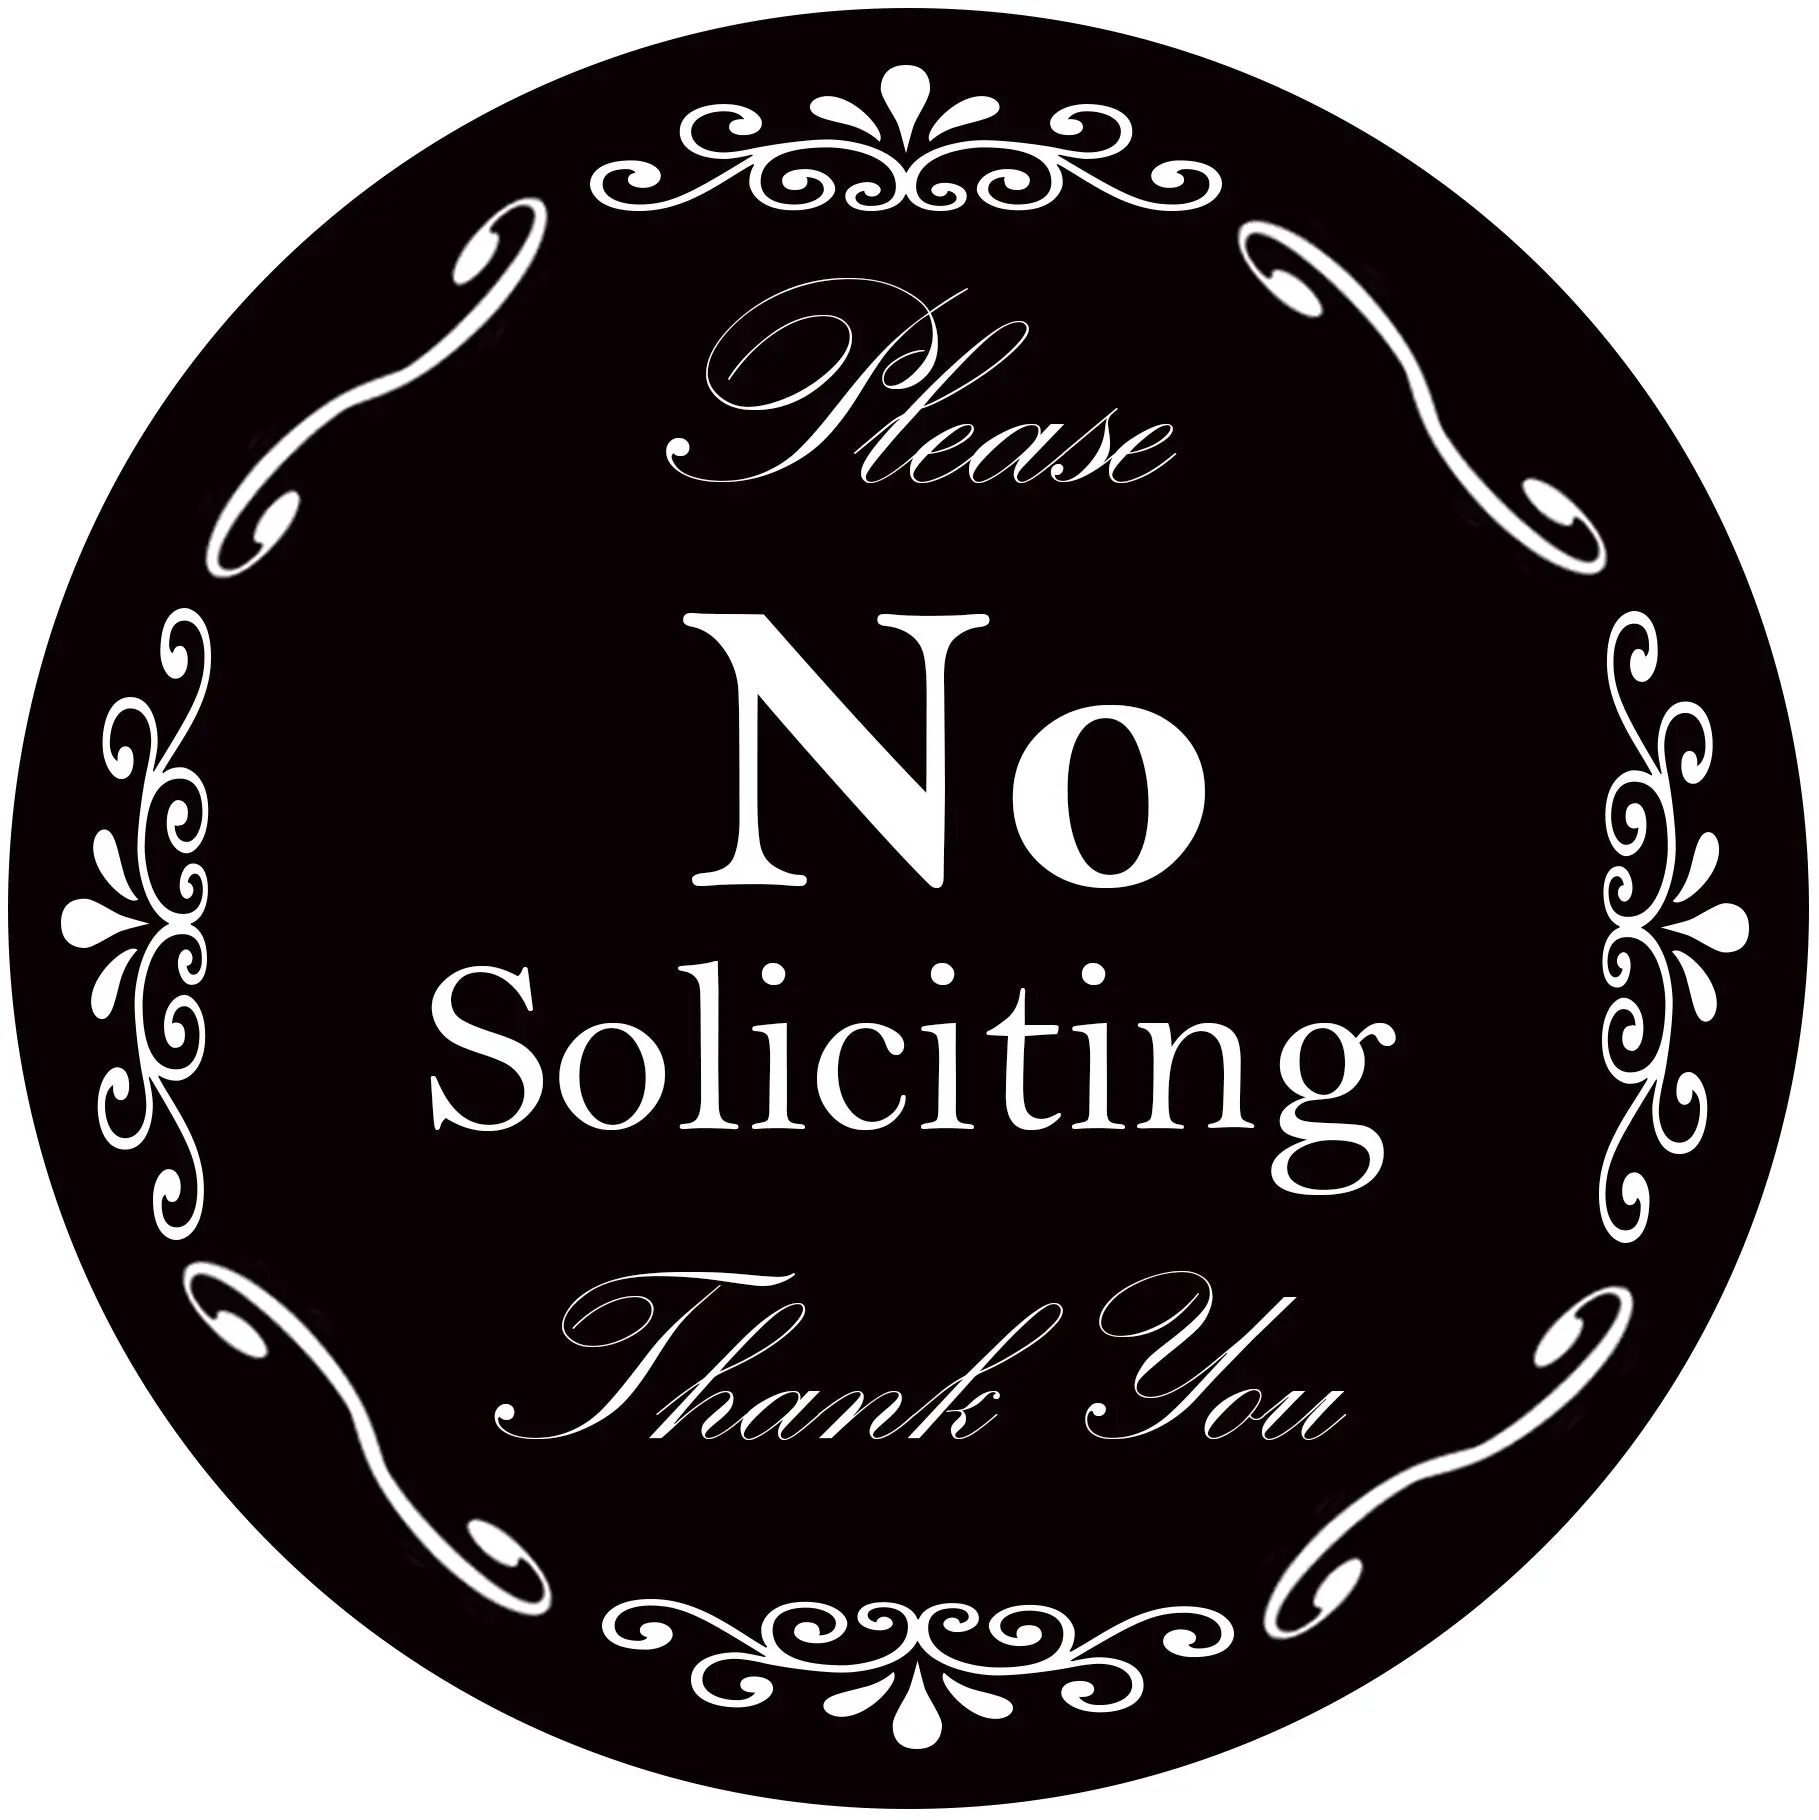 cheap-printable-no-soliciting-door-sign-find-printable-no-soliciting